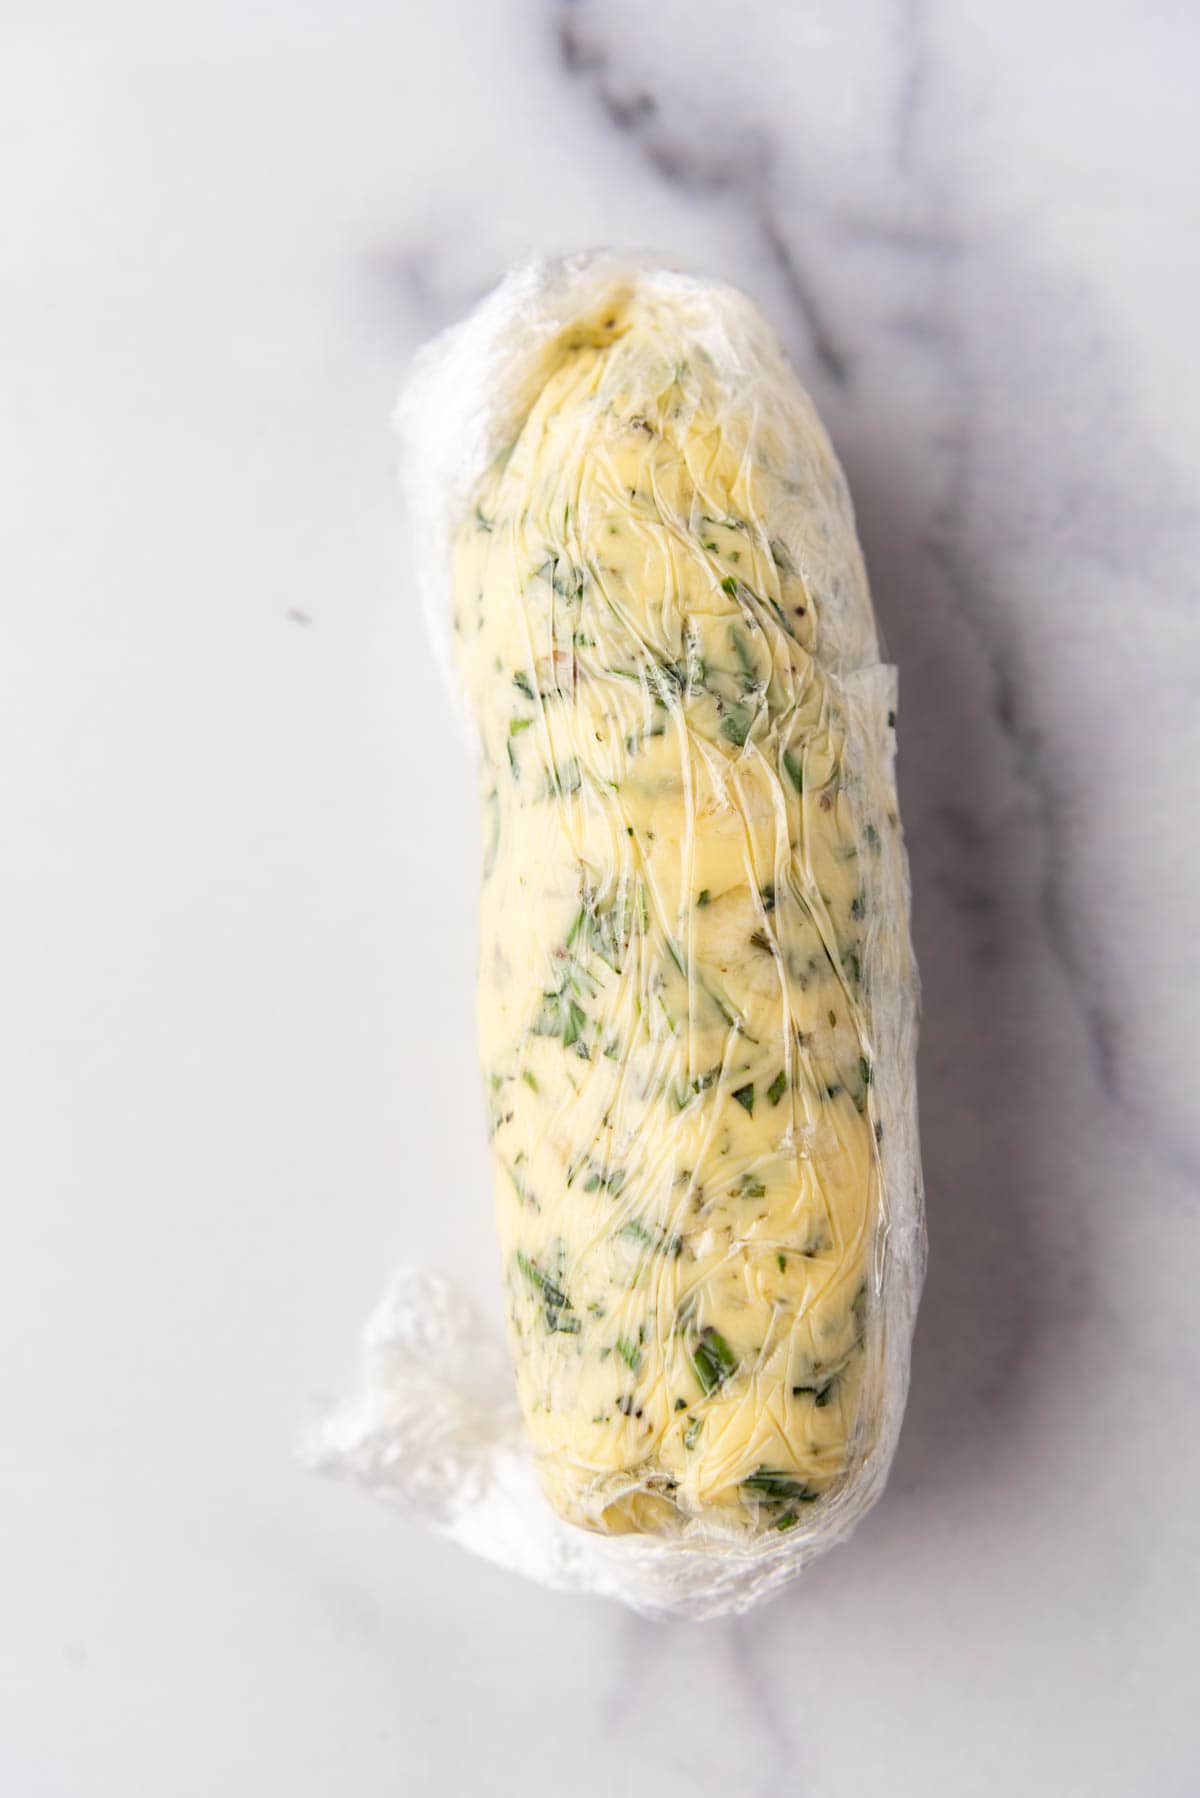 Garlic herb butter wrapped up in plastic wrap into a log shape.